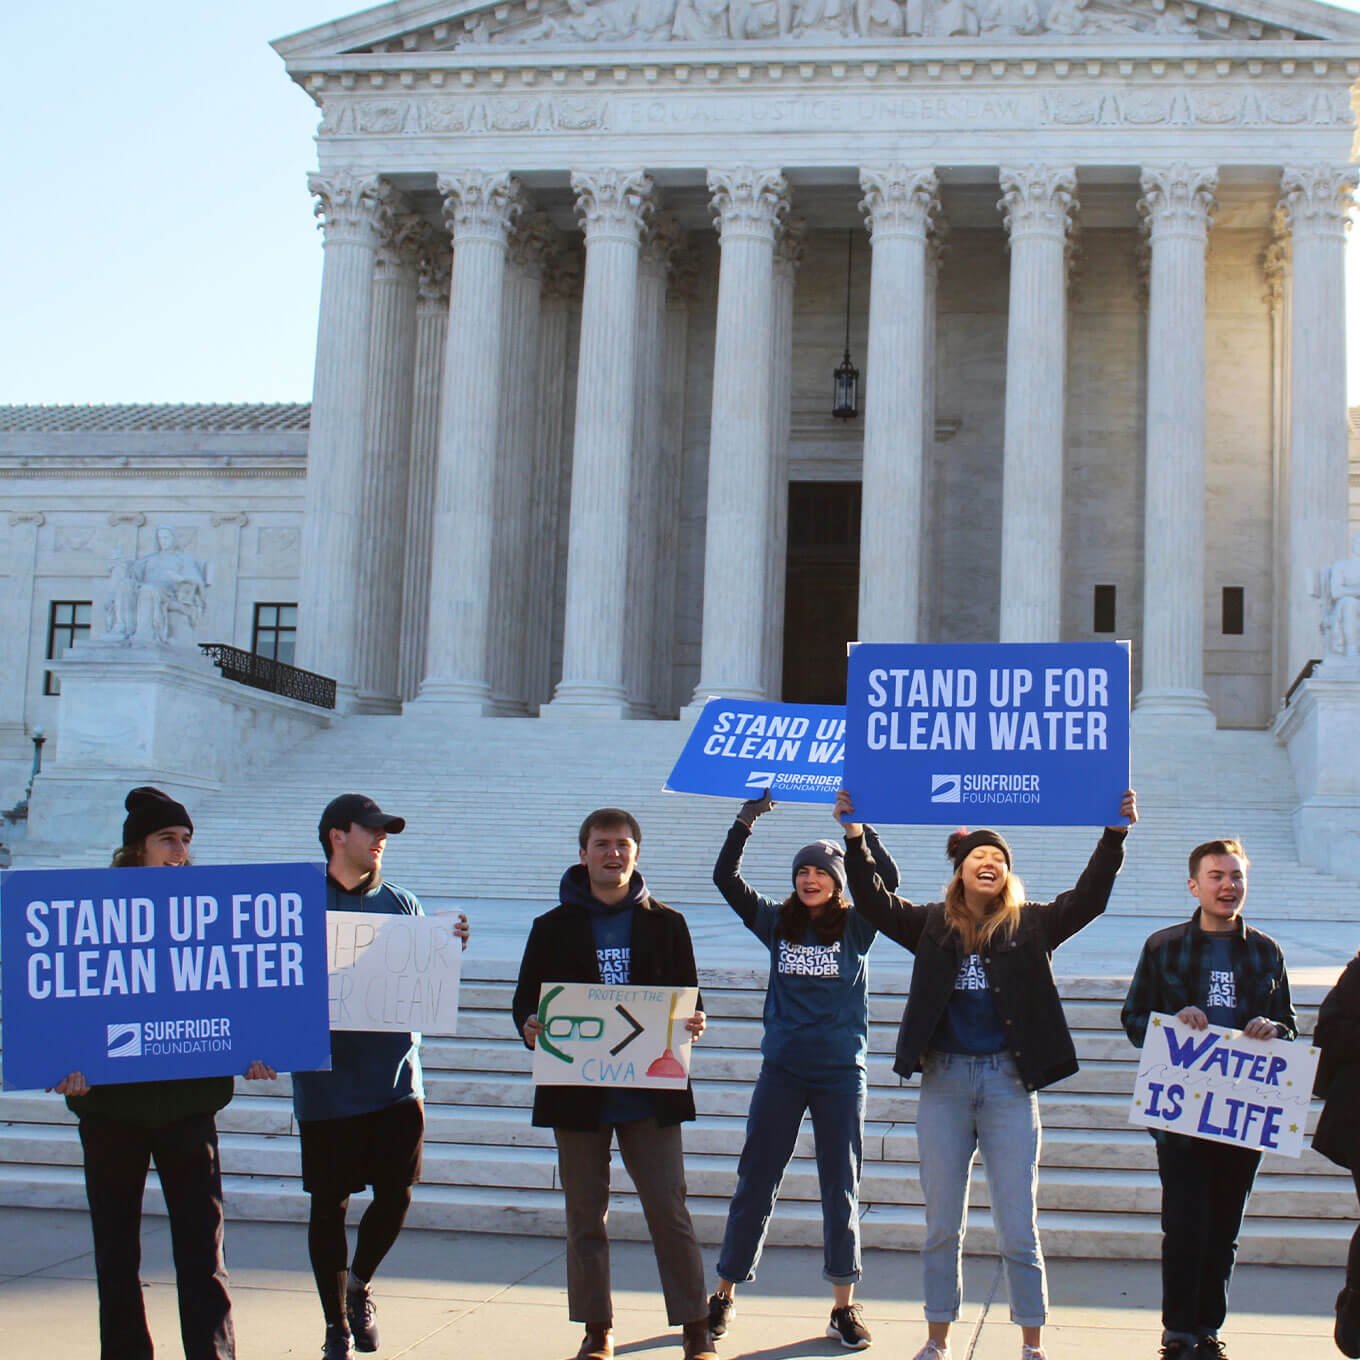 volunteers holding "stand up for clean water" signs outside the capitol building in D.C.